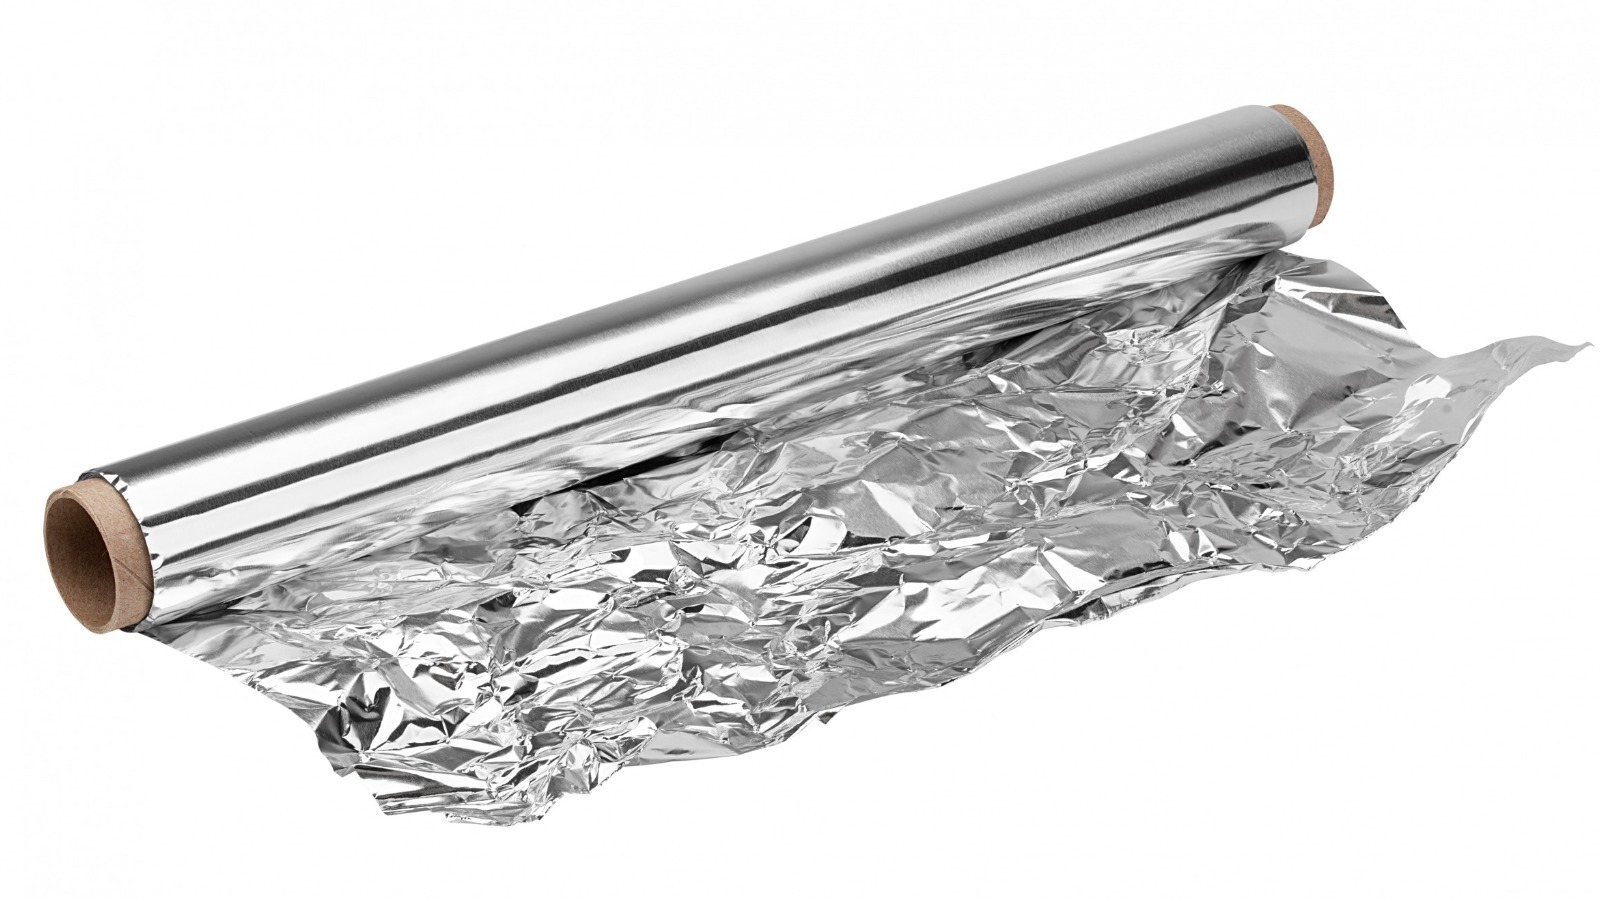 https://www.mashed.com/img/gallery/why-you-should-think-twice-about-using-aluminum-foil-for-leftovers/l-intro-1653760688.jpg